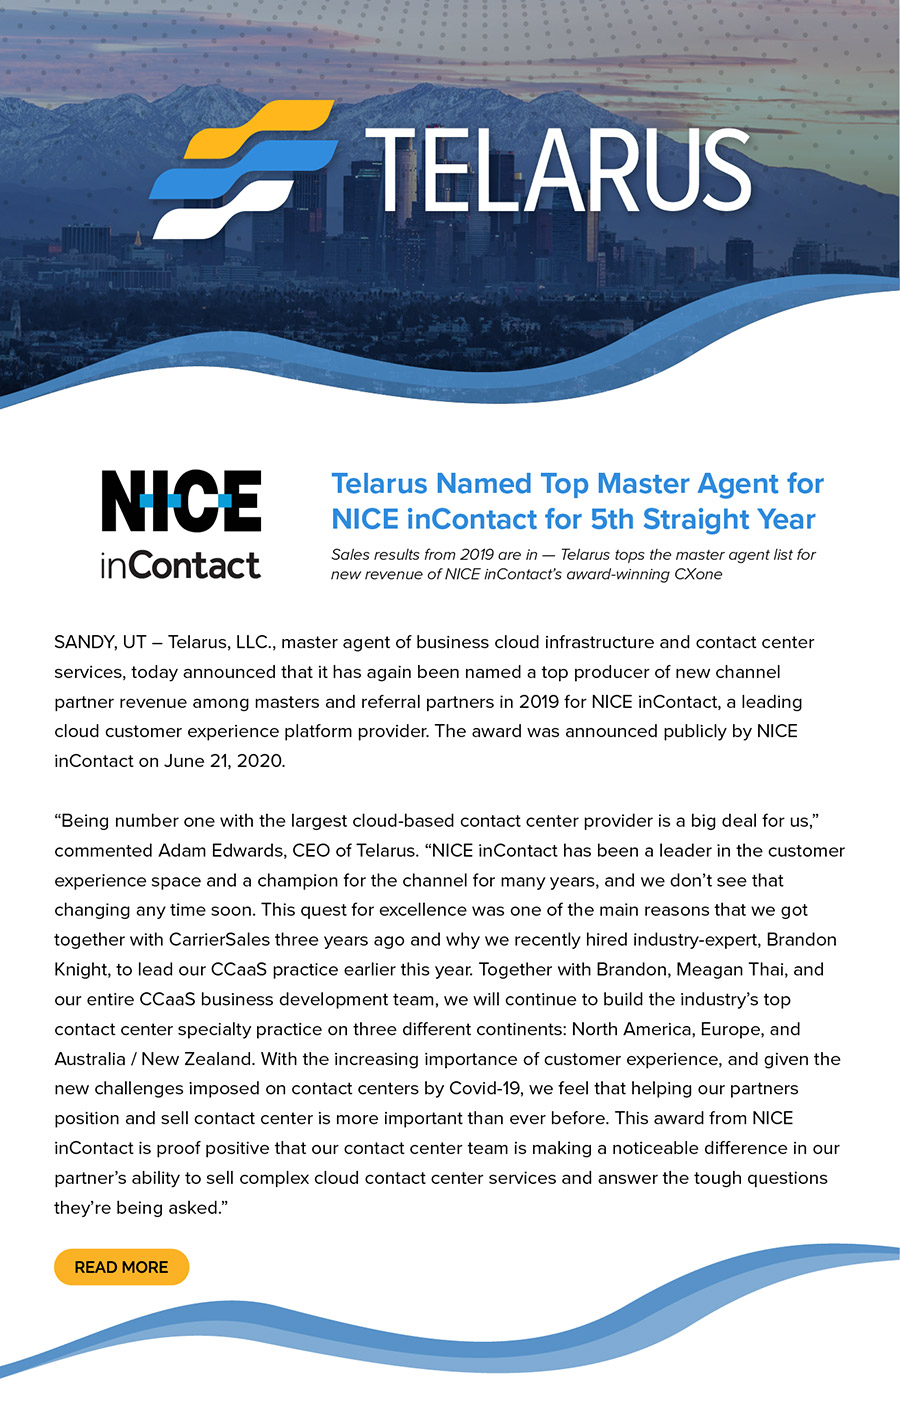 Telarus Named Top Master Agents for NICE inContact for 5th Straight Year